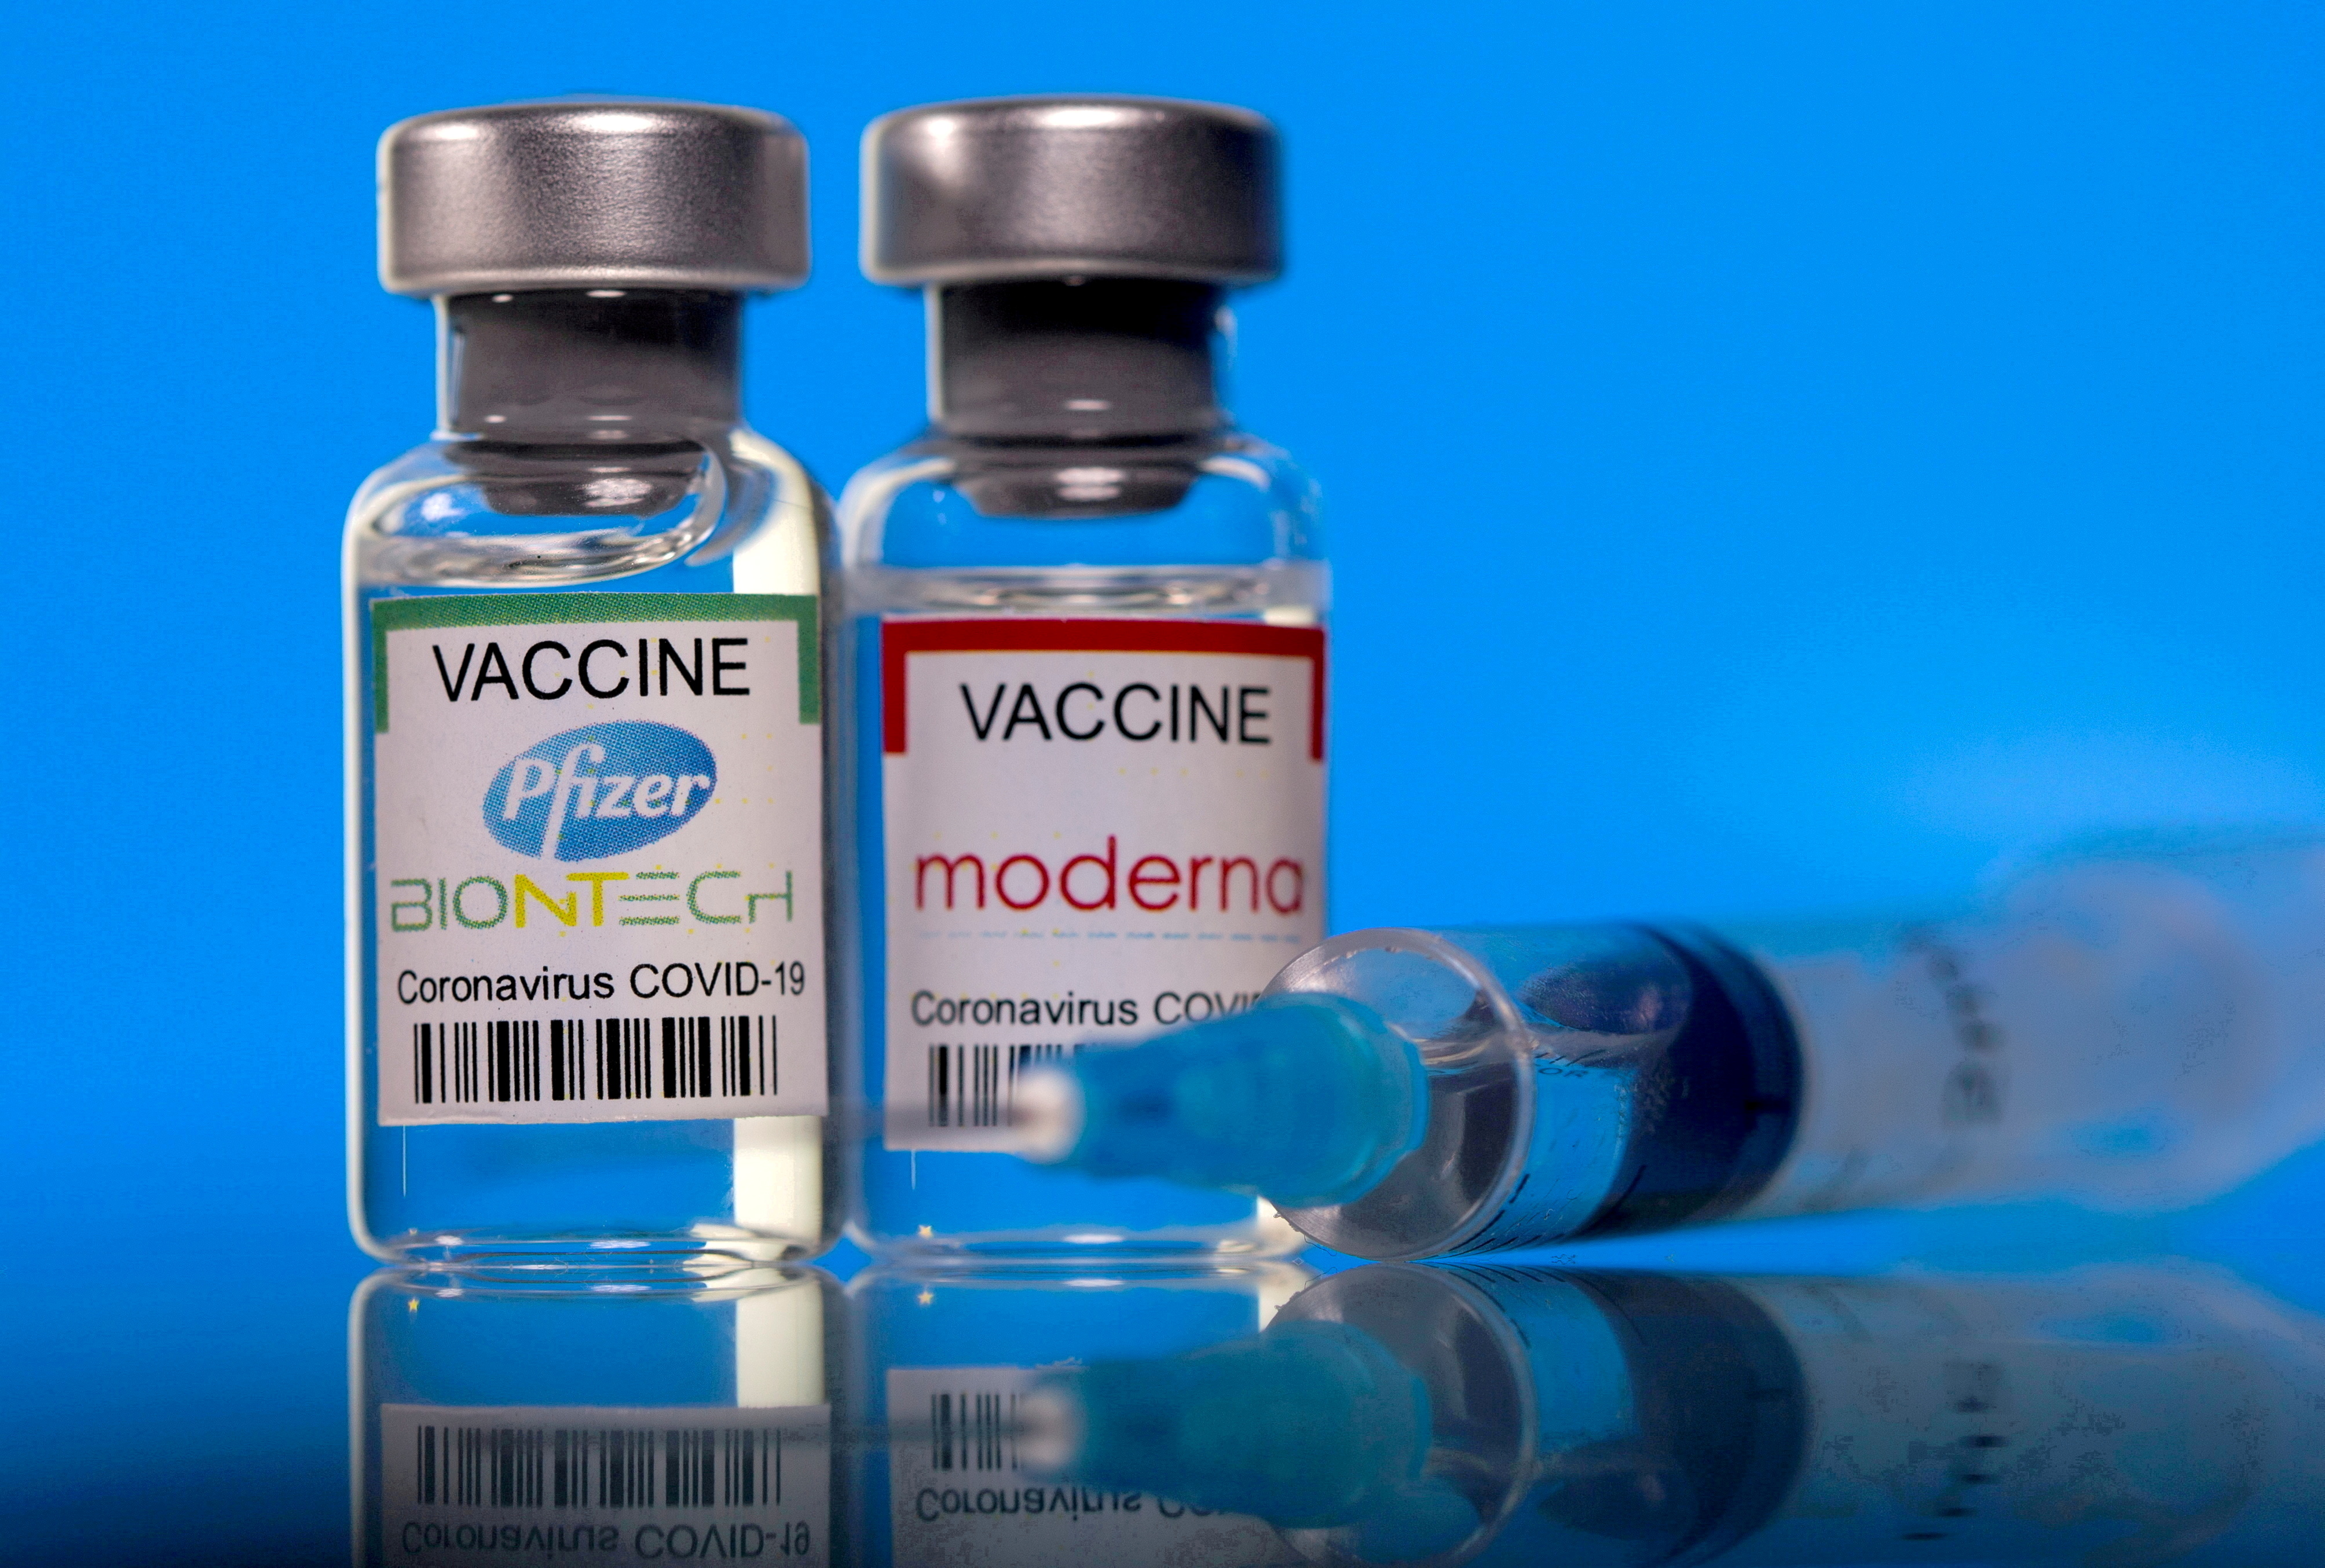 Vials with Pfizer-BioNTech and Moderna coronavirus disease (COVID-19) vaccine labels are seen in this illustration picture taken March 19, 2021. REUTERS/Dado Ruvic/File Photo